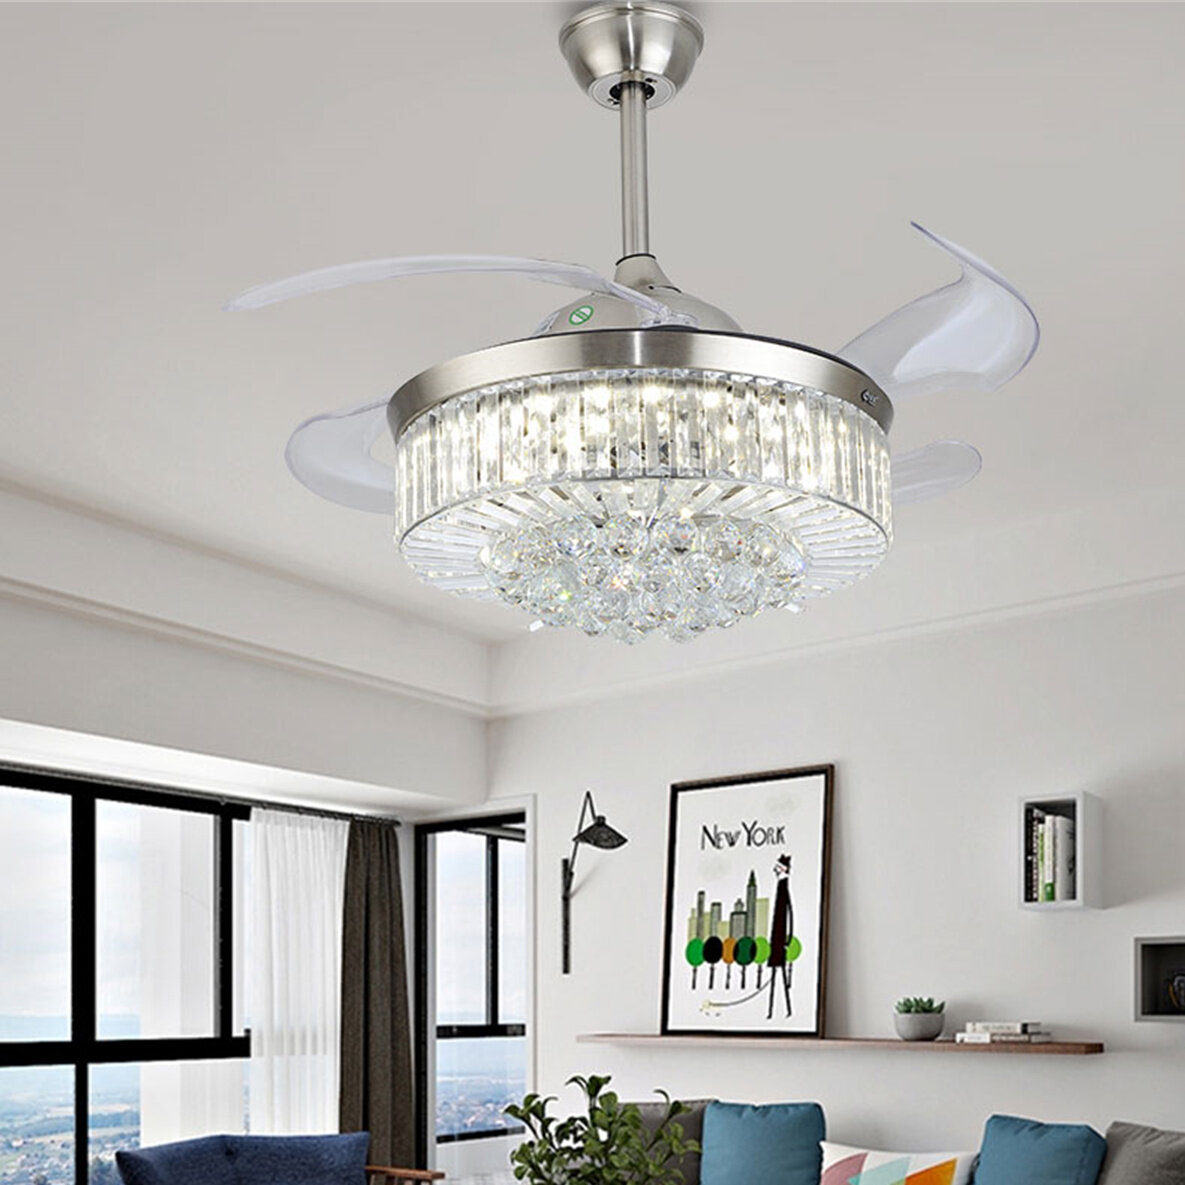 42 Inches Wide Ceiling Fan Clear Acrylic Blades Led Light Kits Crystal Chandelier Control Remote Chrome Finish Living Room Family Room